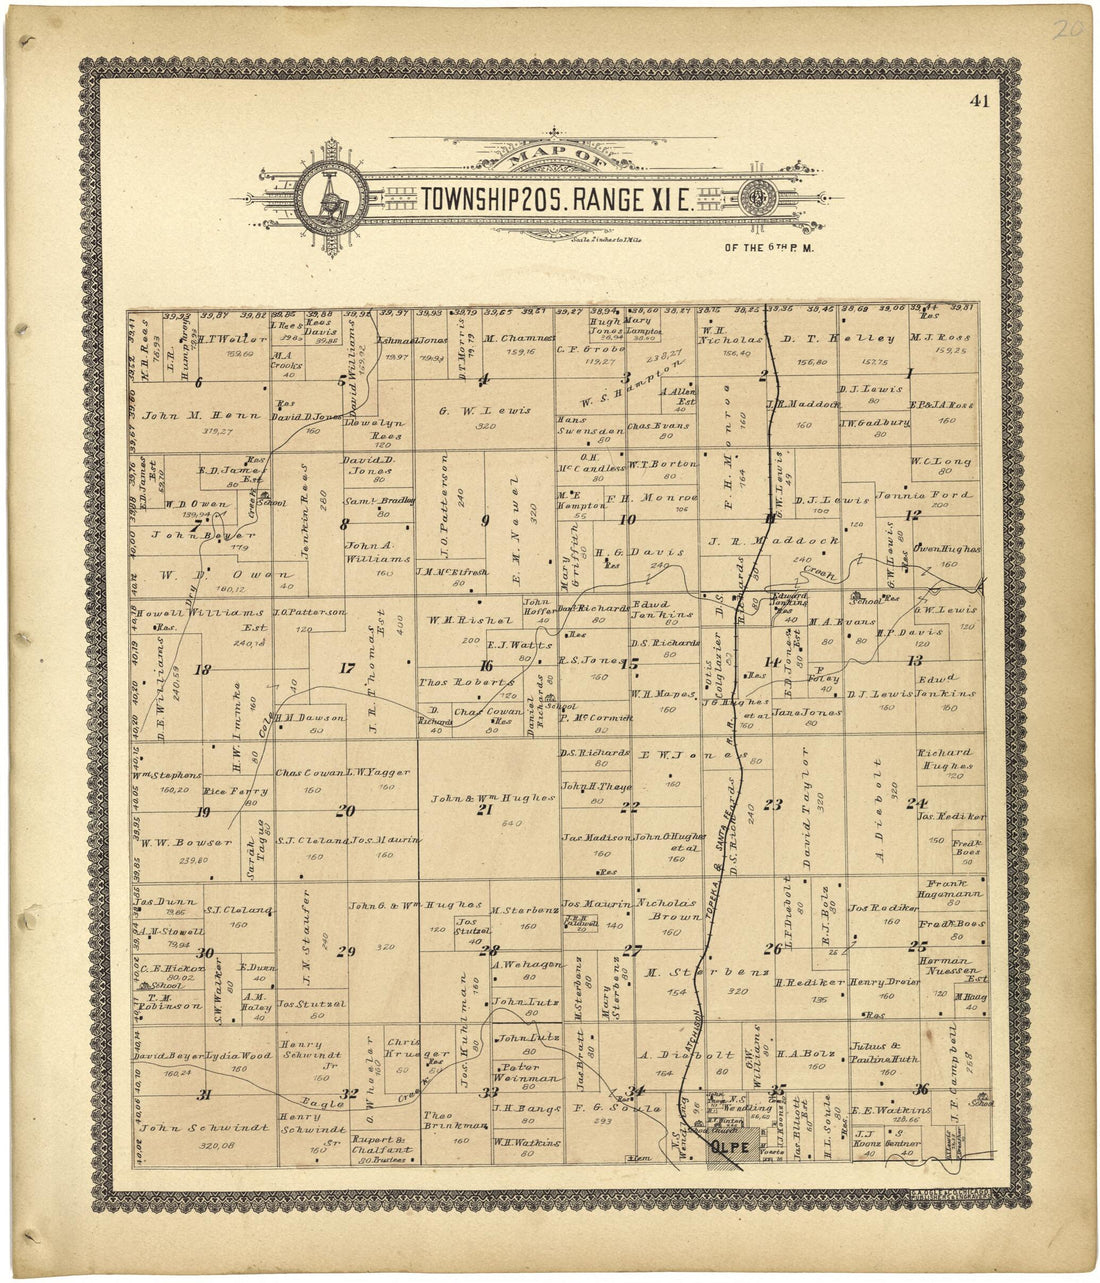 This old map of Map of Township 20 S. Range XI E. from Standard Atlas of Lyon County, Kansas from 1901 was created by  Geo. A. Ogle &amp; Co in 1901